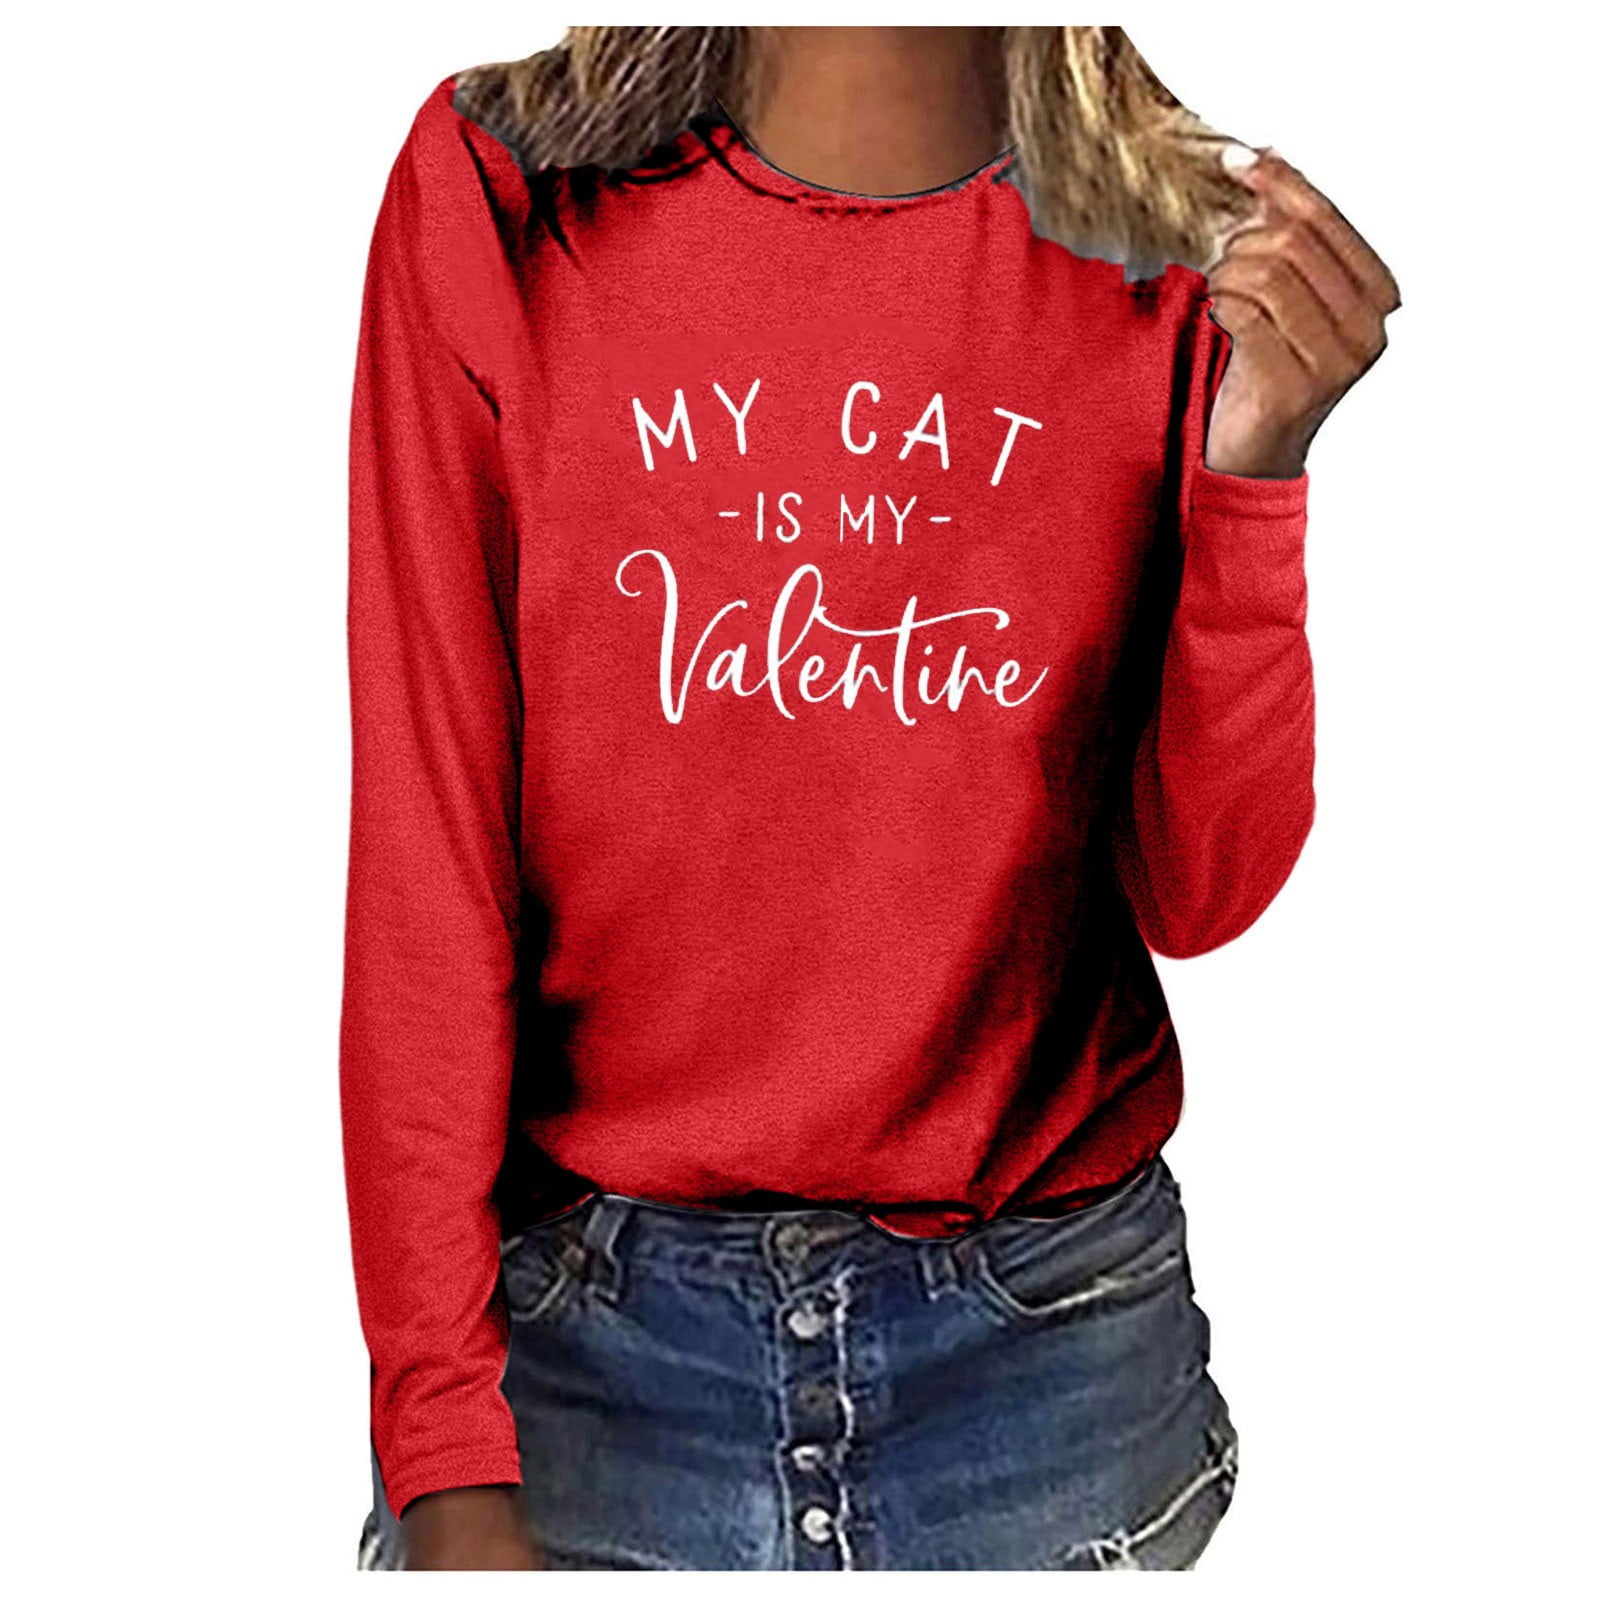 Womens Casual Crew Neck Sweatshirt Shirts Funny Cat Letter Print Long Sleeve Blouse Tops 